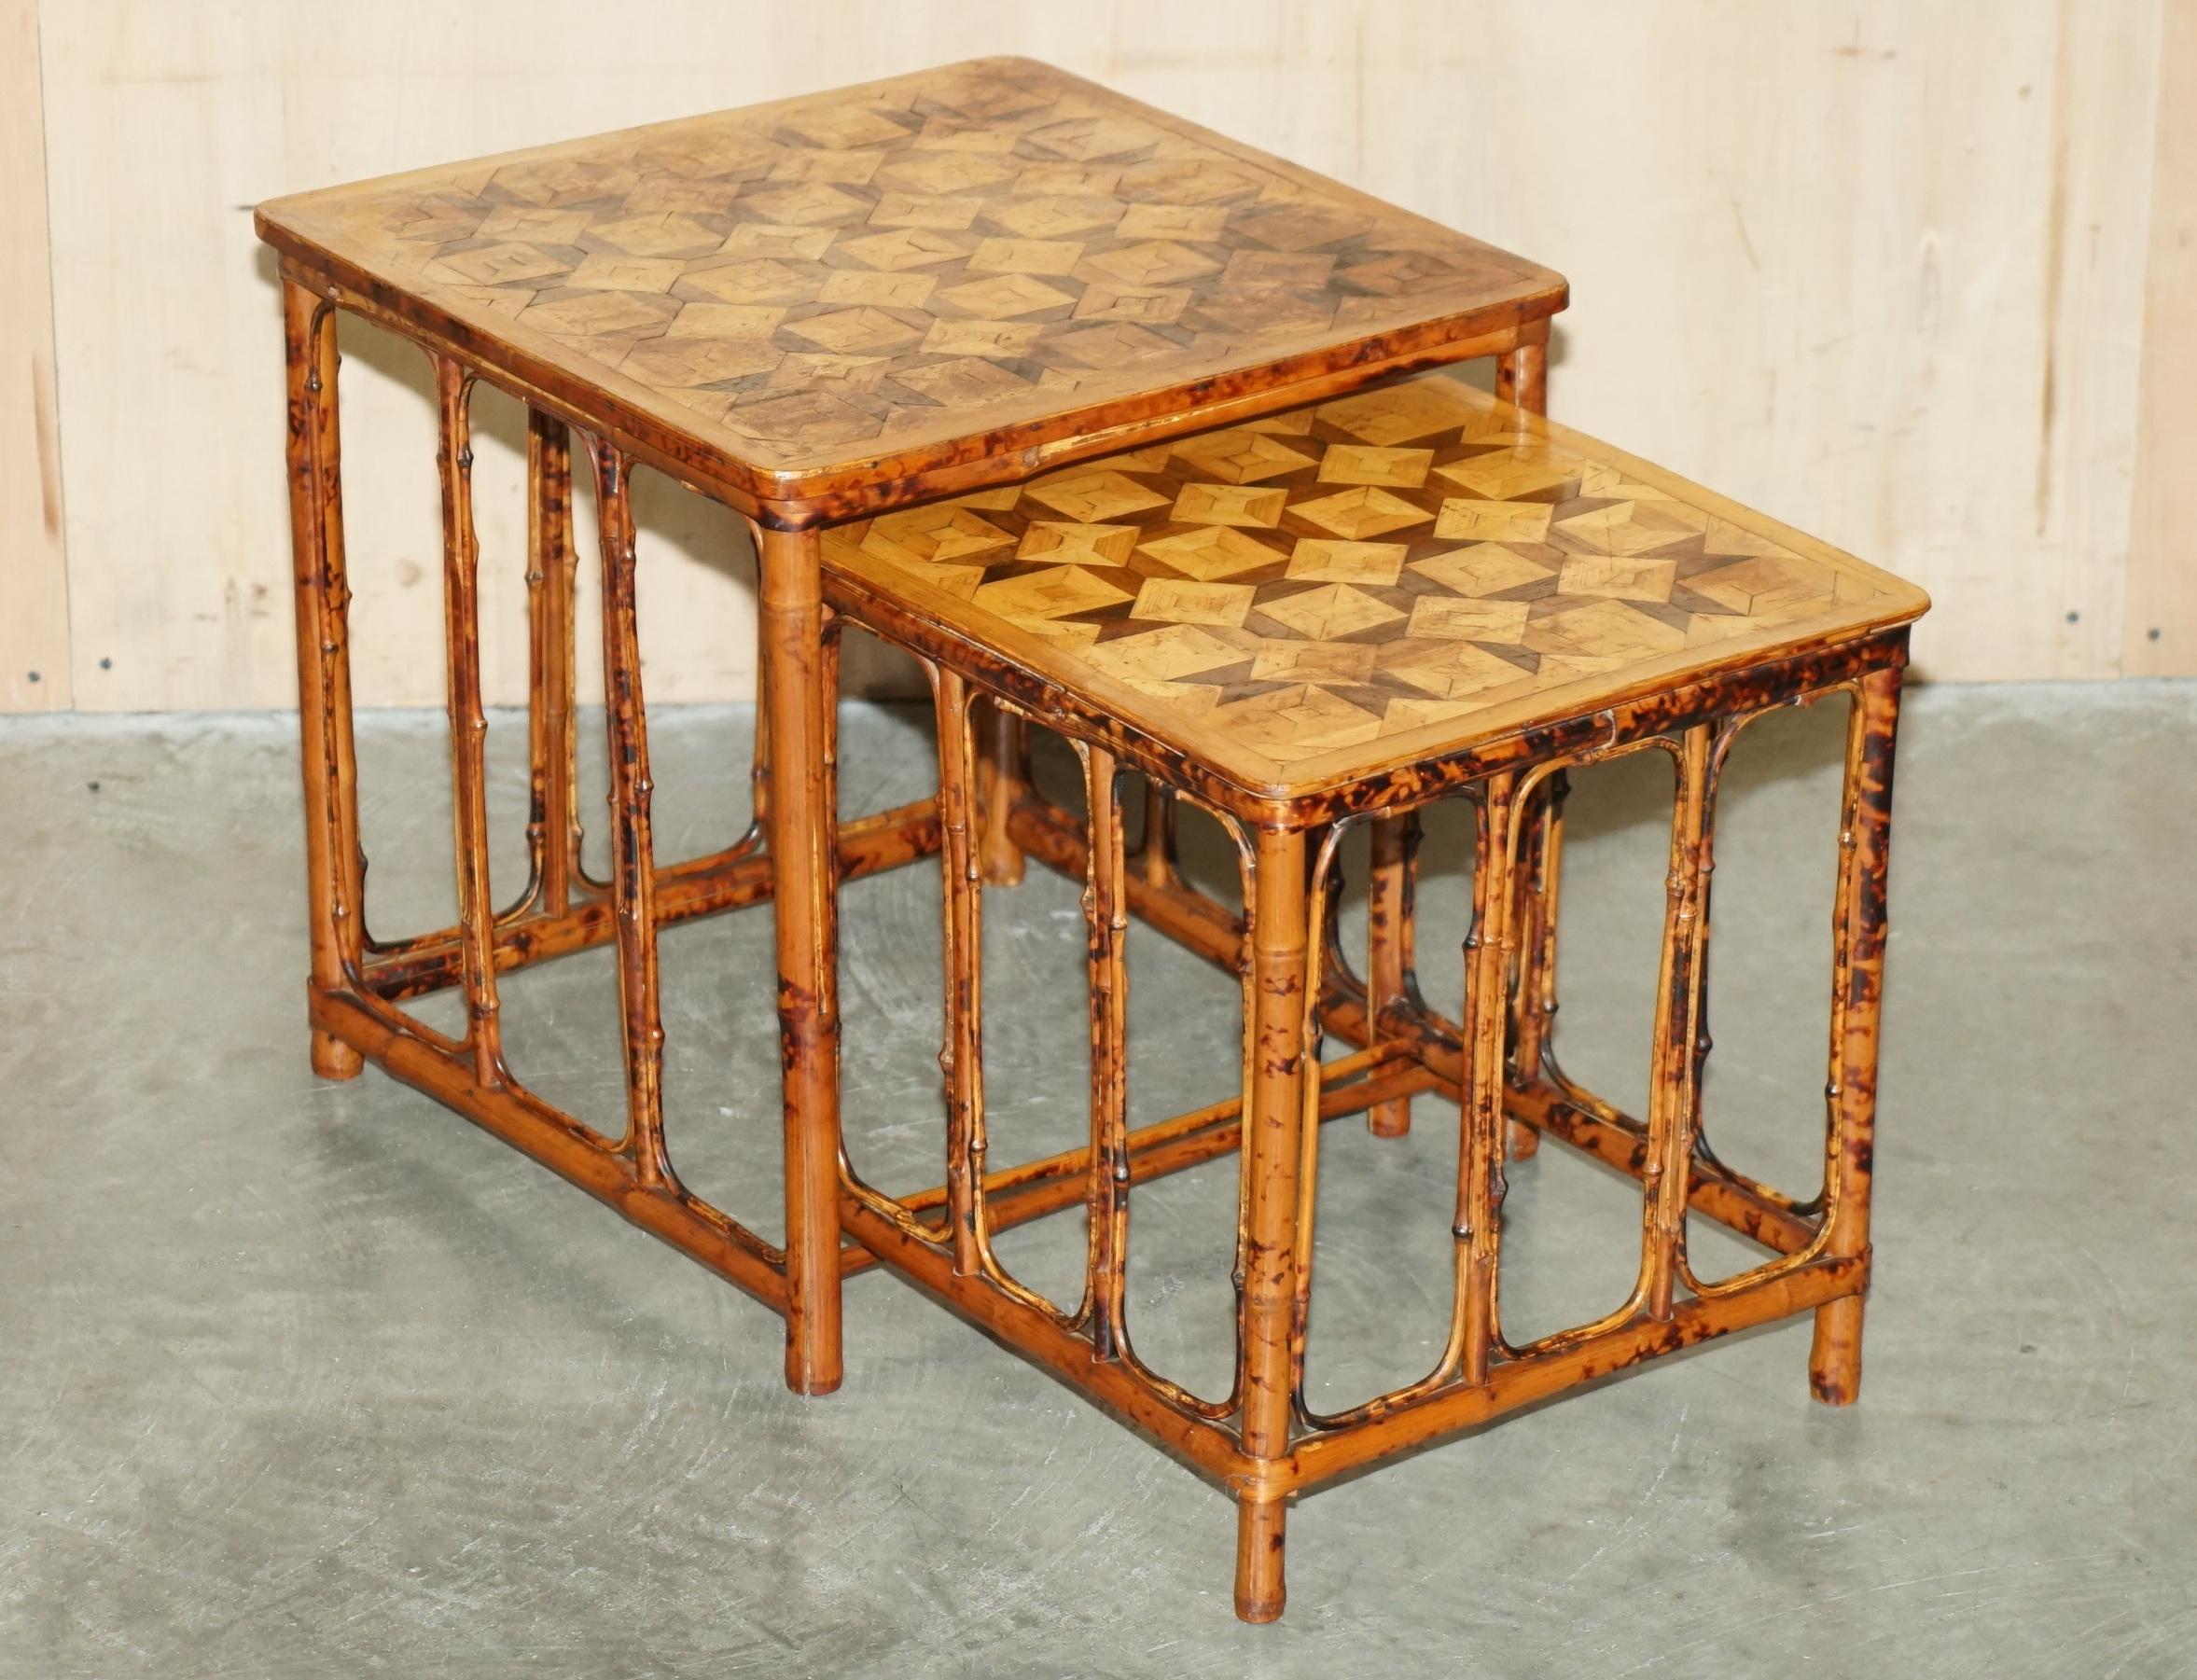 Royal House Antiques

Royal House Antiques is delighted to offer for sale this lovely antique circa 1880 Victorian Bamboo nest of tables with Parquetry tops  

Please note the delivery fee listed is just a guide, it covers within the M25 only for